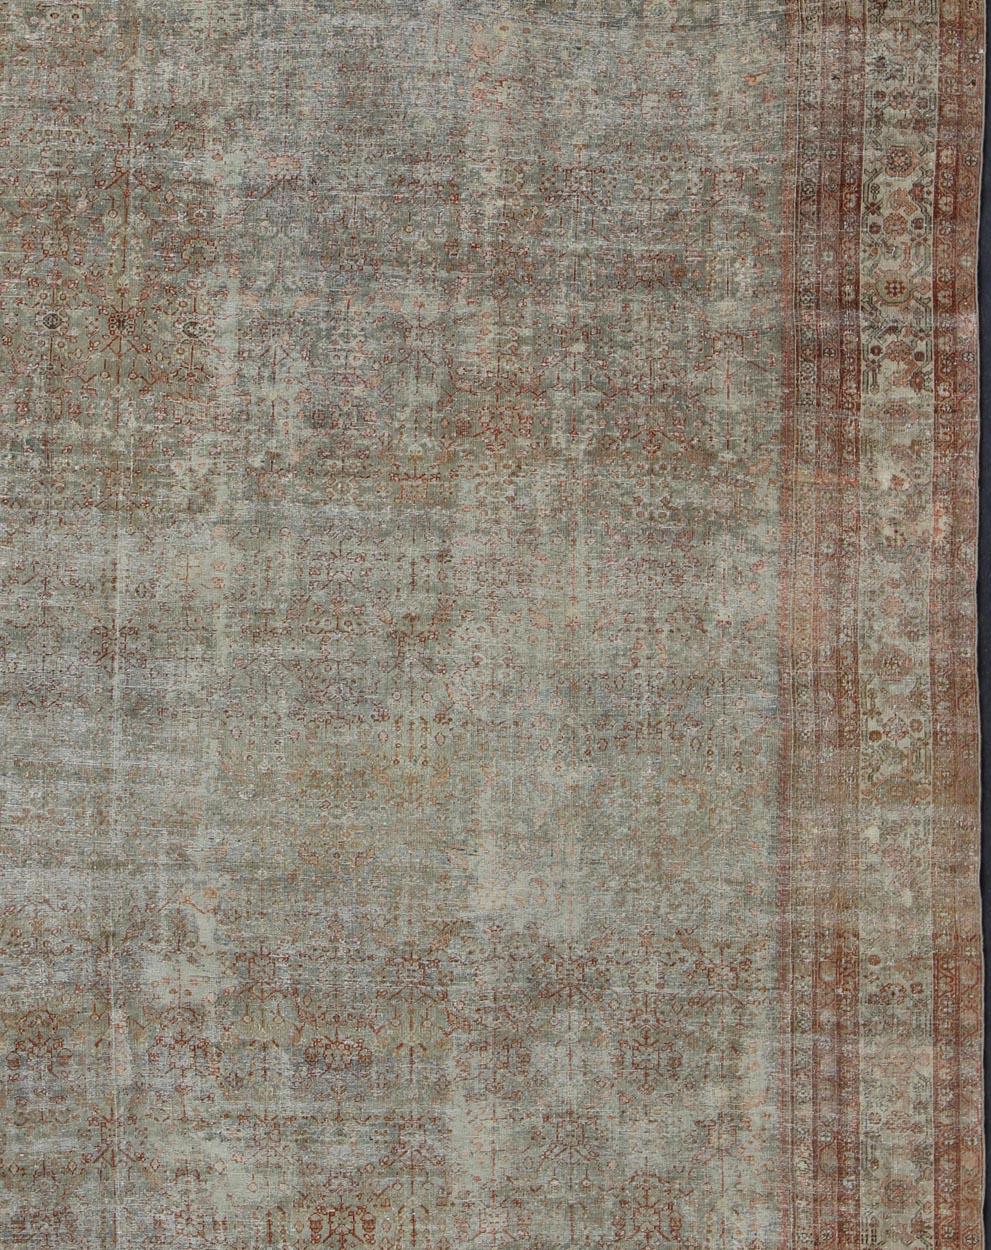 Hand-Knotted Antique Persian Distressed Sultanabad Rug with Subdued All-Over Design in Green